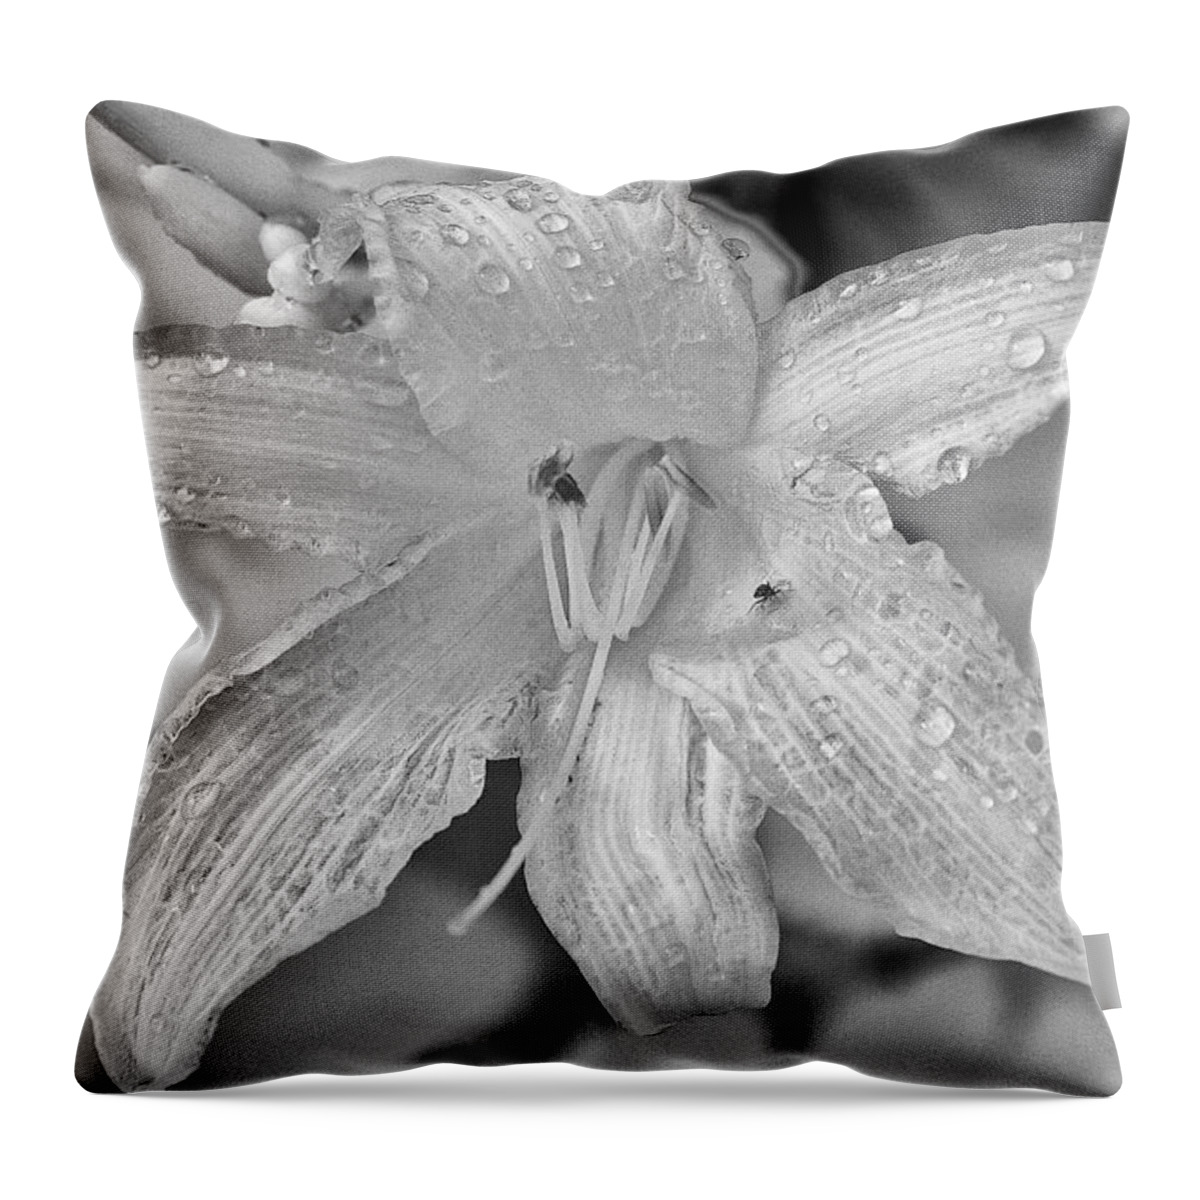 Infrafed Throw Pillow featuring the photograph Lily In Infrared by Dick Pratt